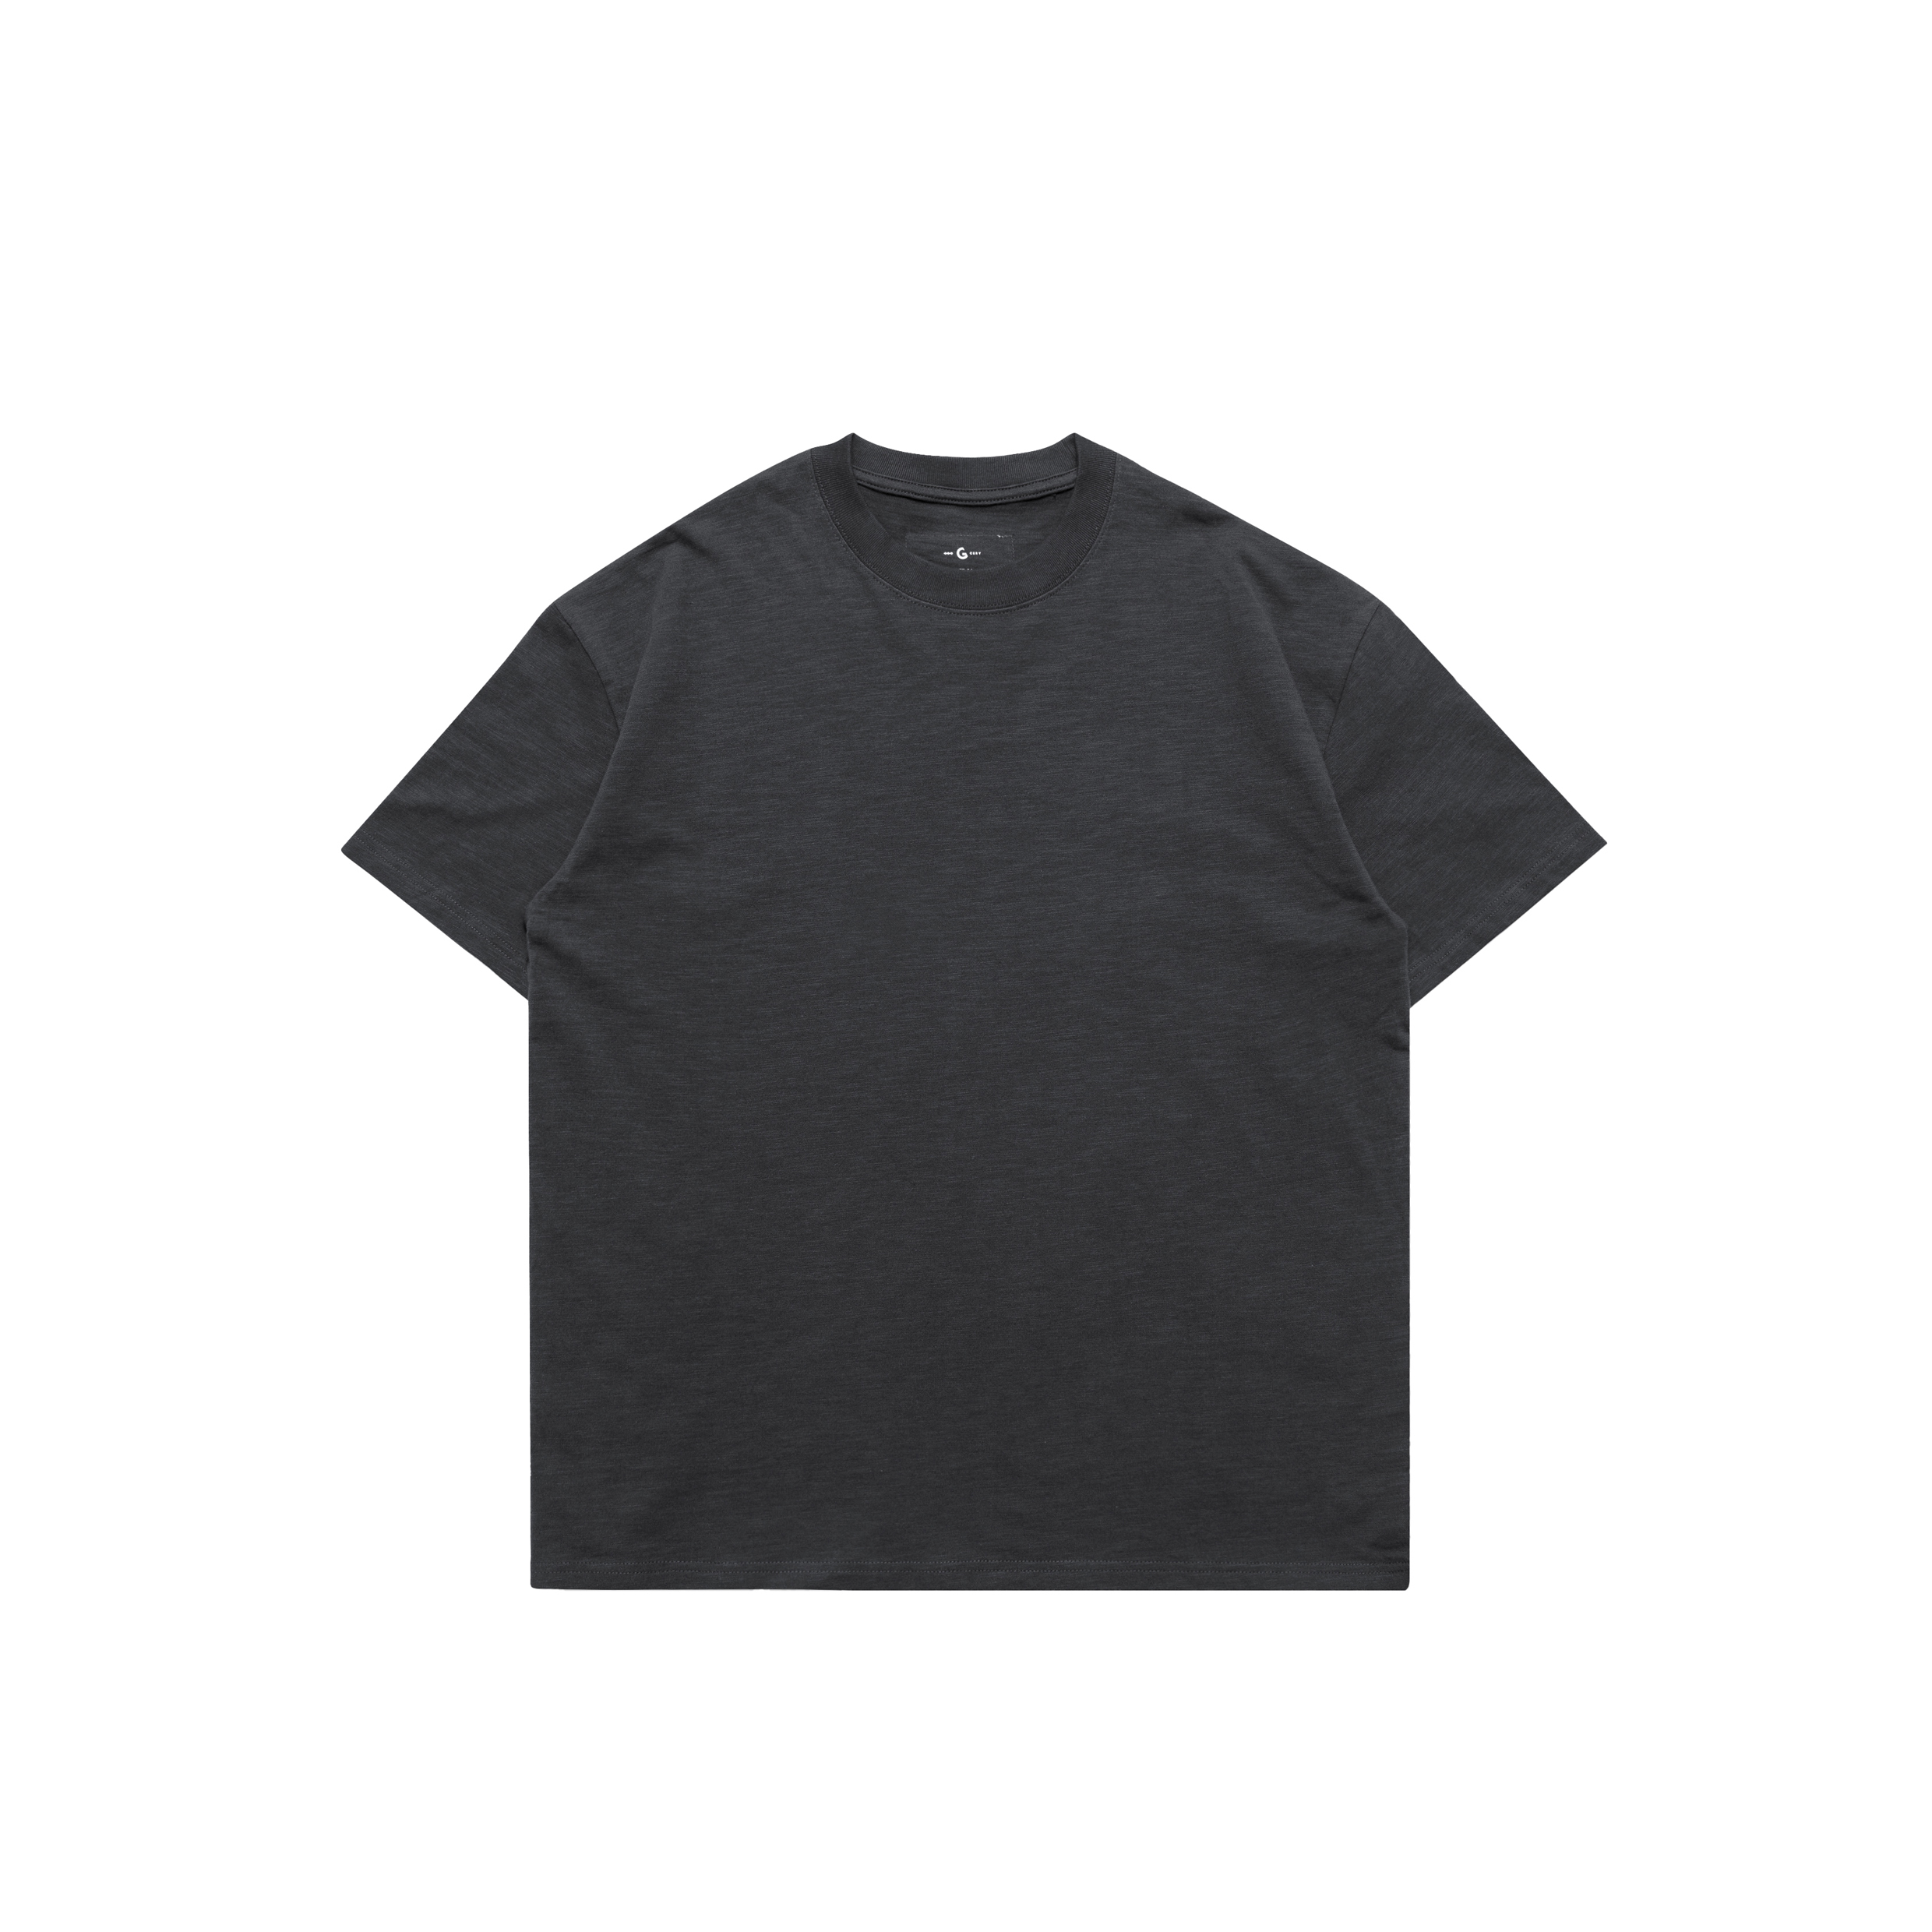 Grocery - SS23 TEE-001 Invoice - Charcoal